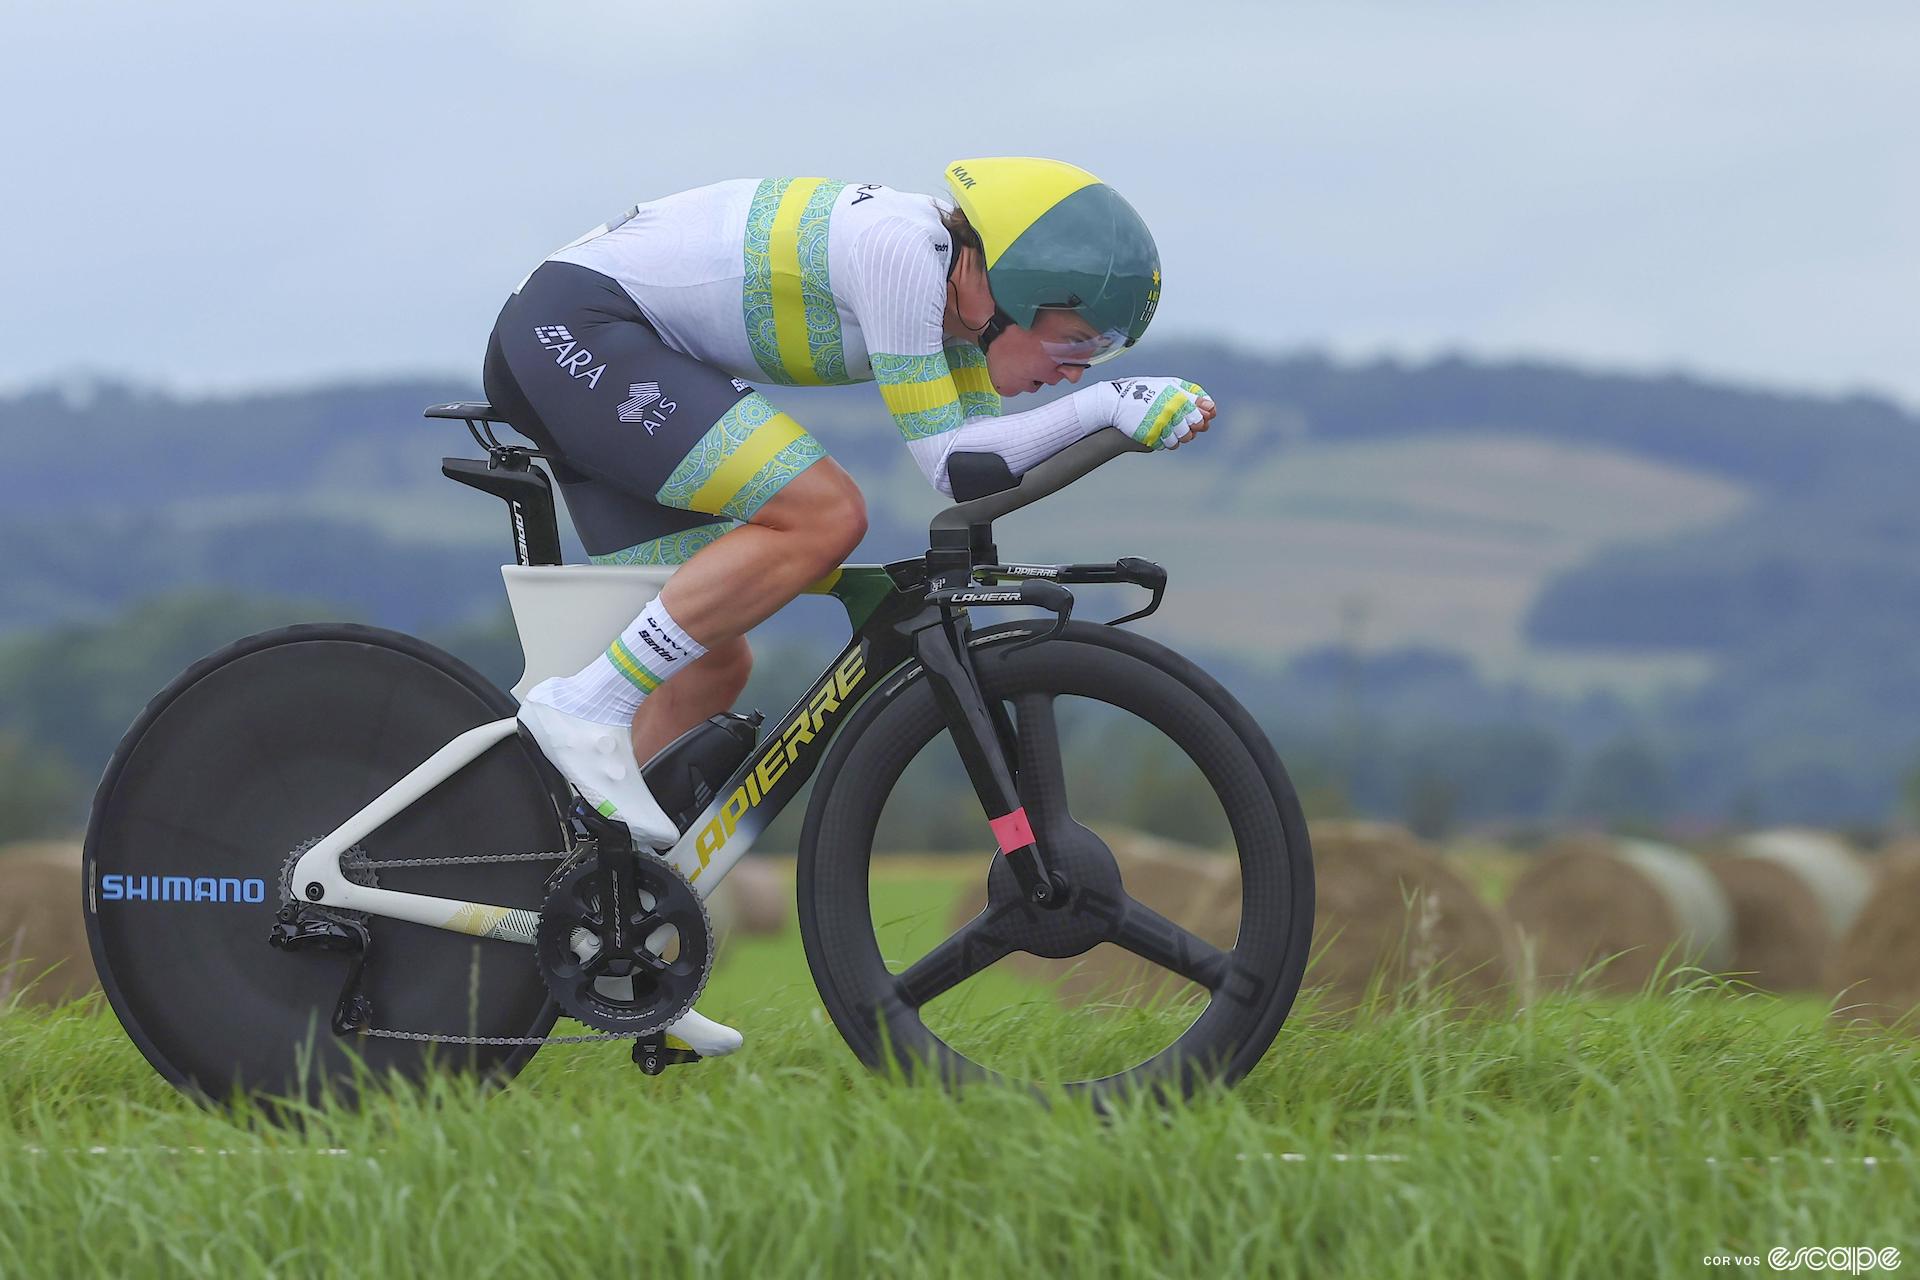 Grace Brown rides in the 2023 World Time Trial Championship in Glasgow, Scotland. The Australian is dressed in the national team kit, with green and yellow bands, and is in an extremely aerodynamic position en route to her second consecutive silver medal.